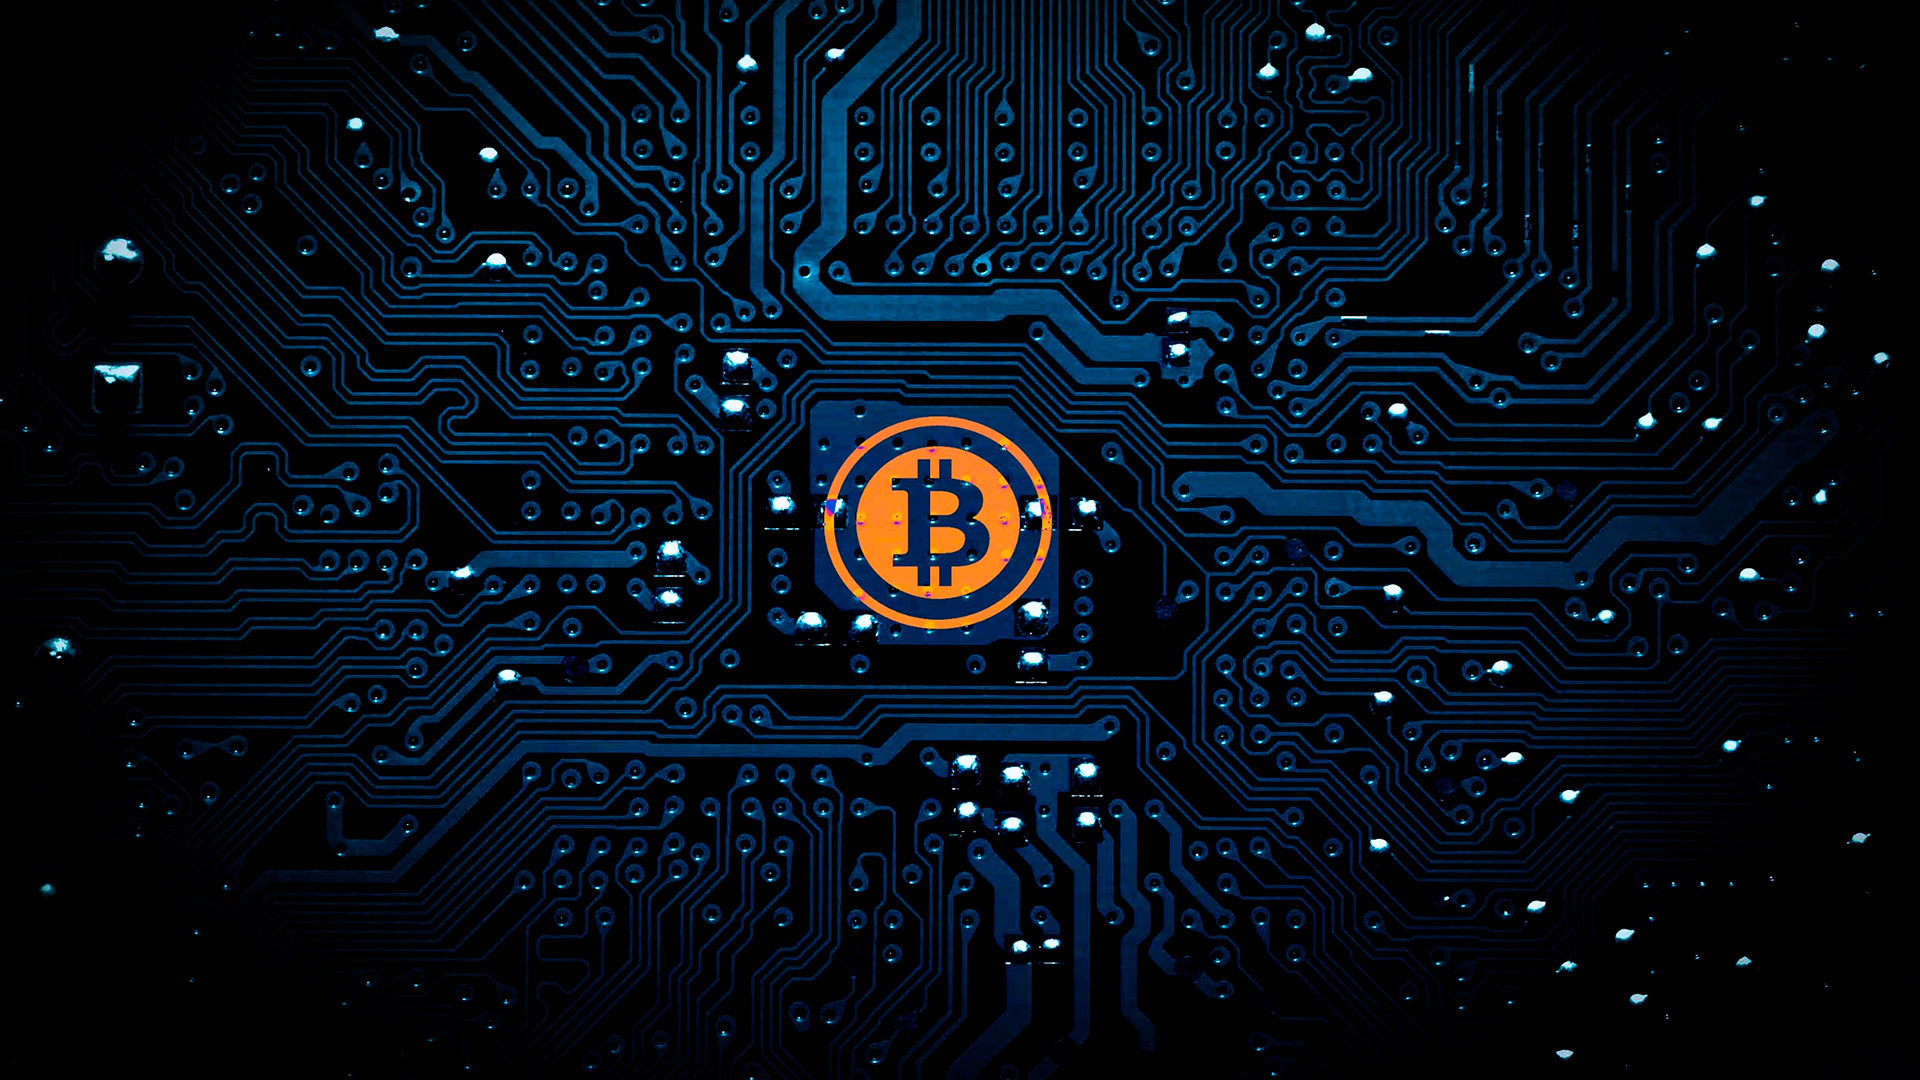 Bitcoin Crypto Currency Wallpaper - Themes10.win